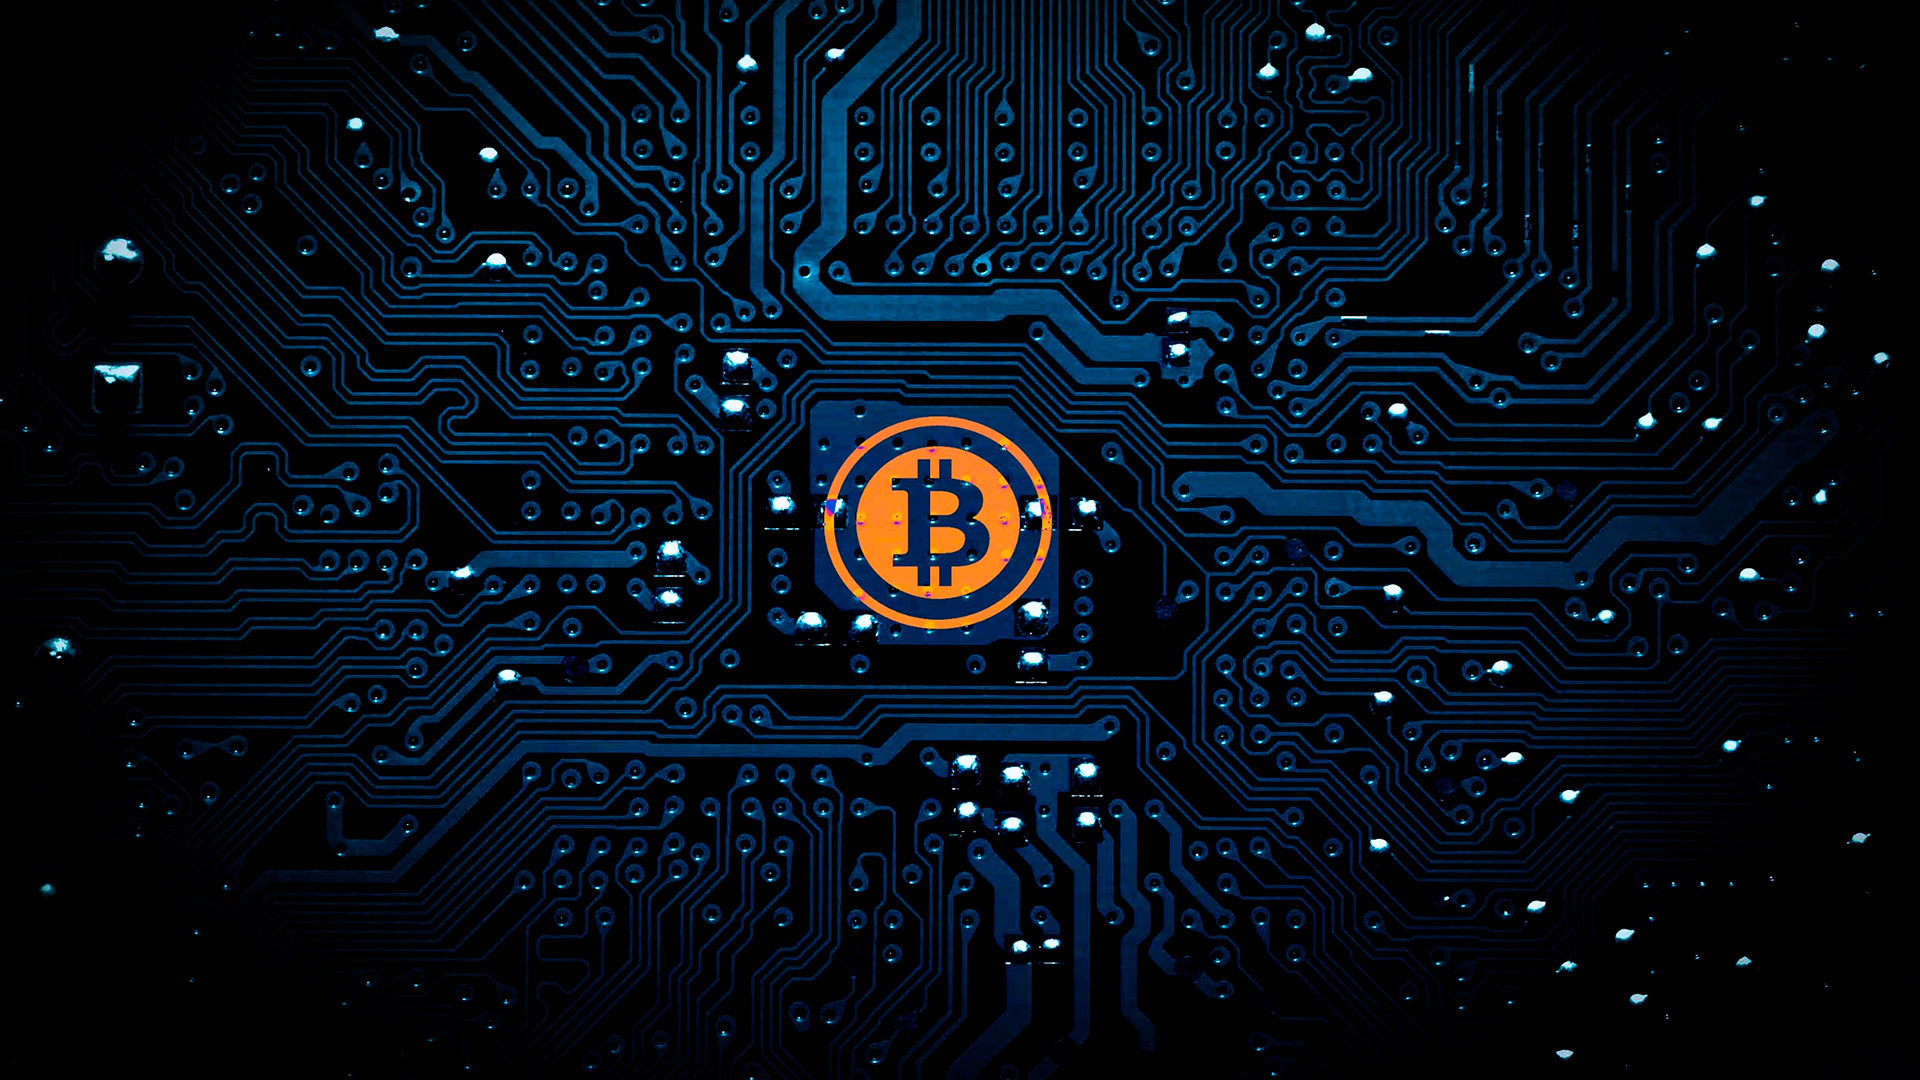 Bitcoin Crypto Currency Wallpaper - Themes10.win